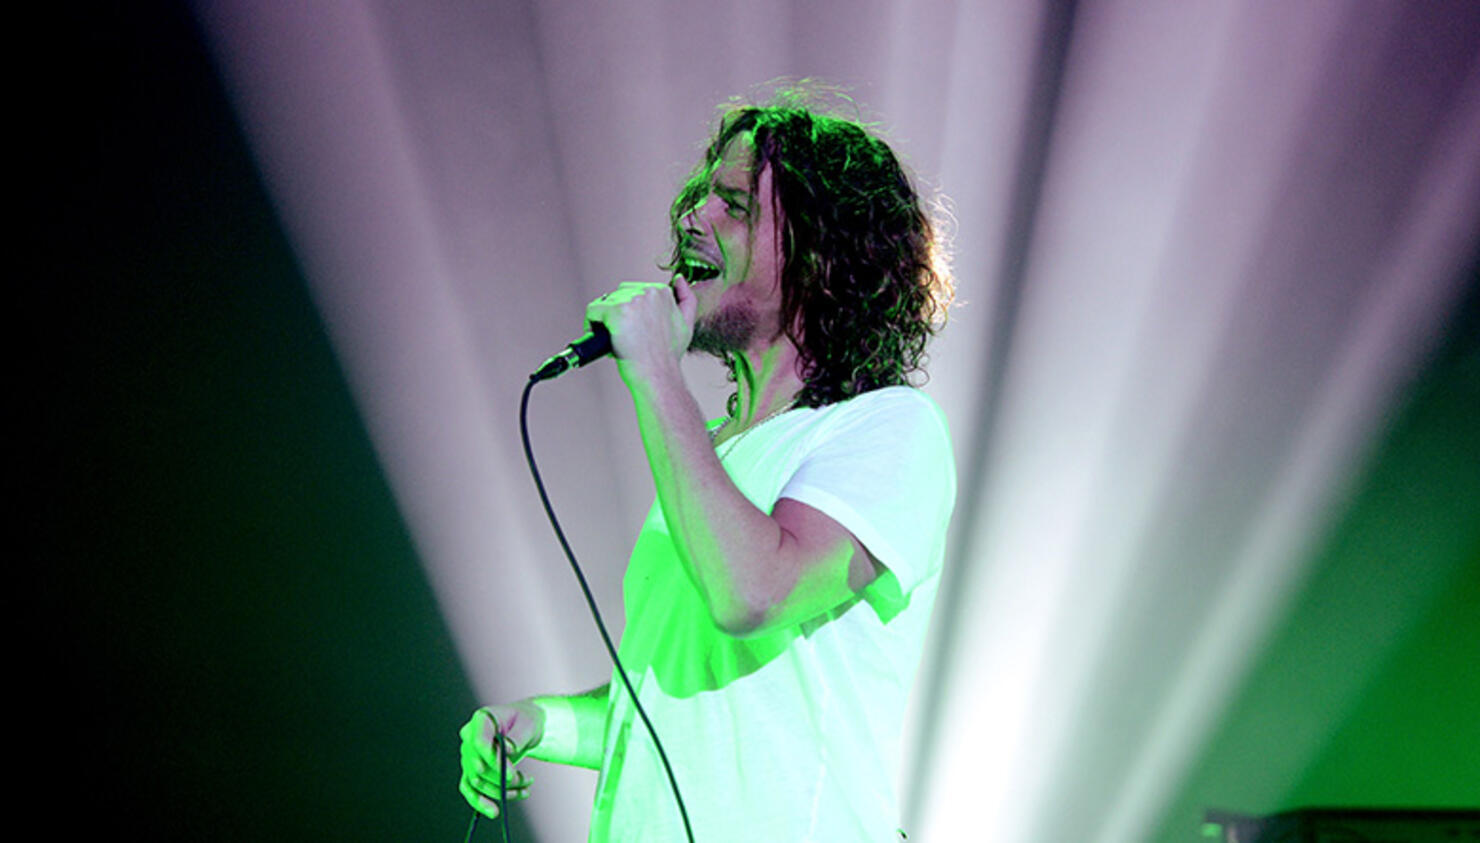 Soundgarden Members to Perform Together for the First Time Since Chris Cornell Death